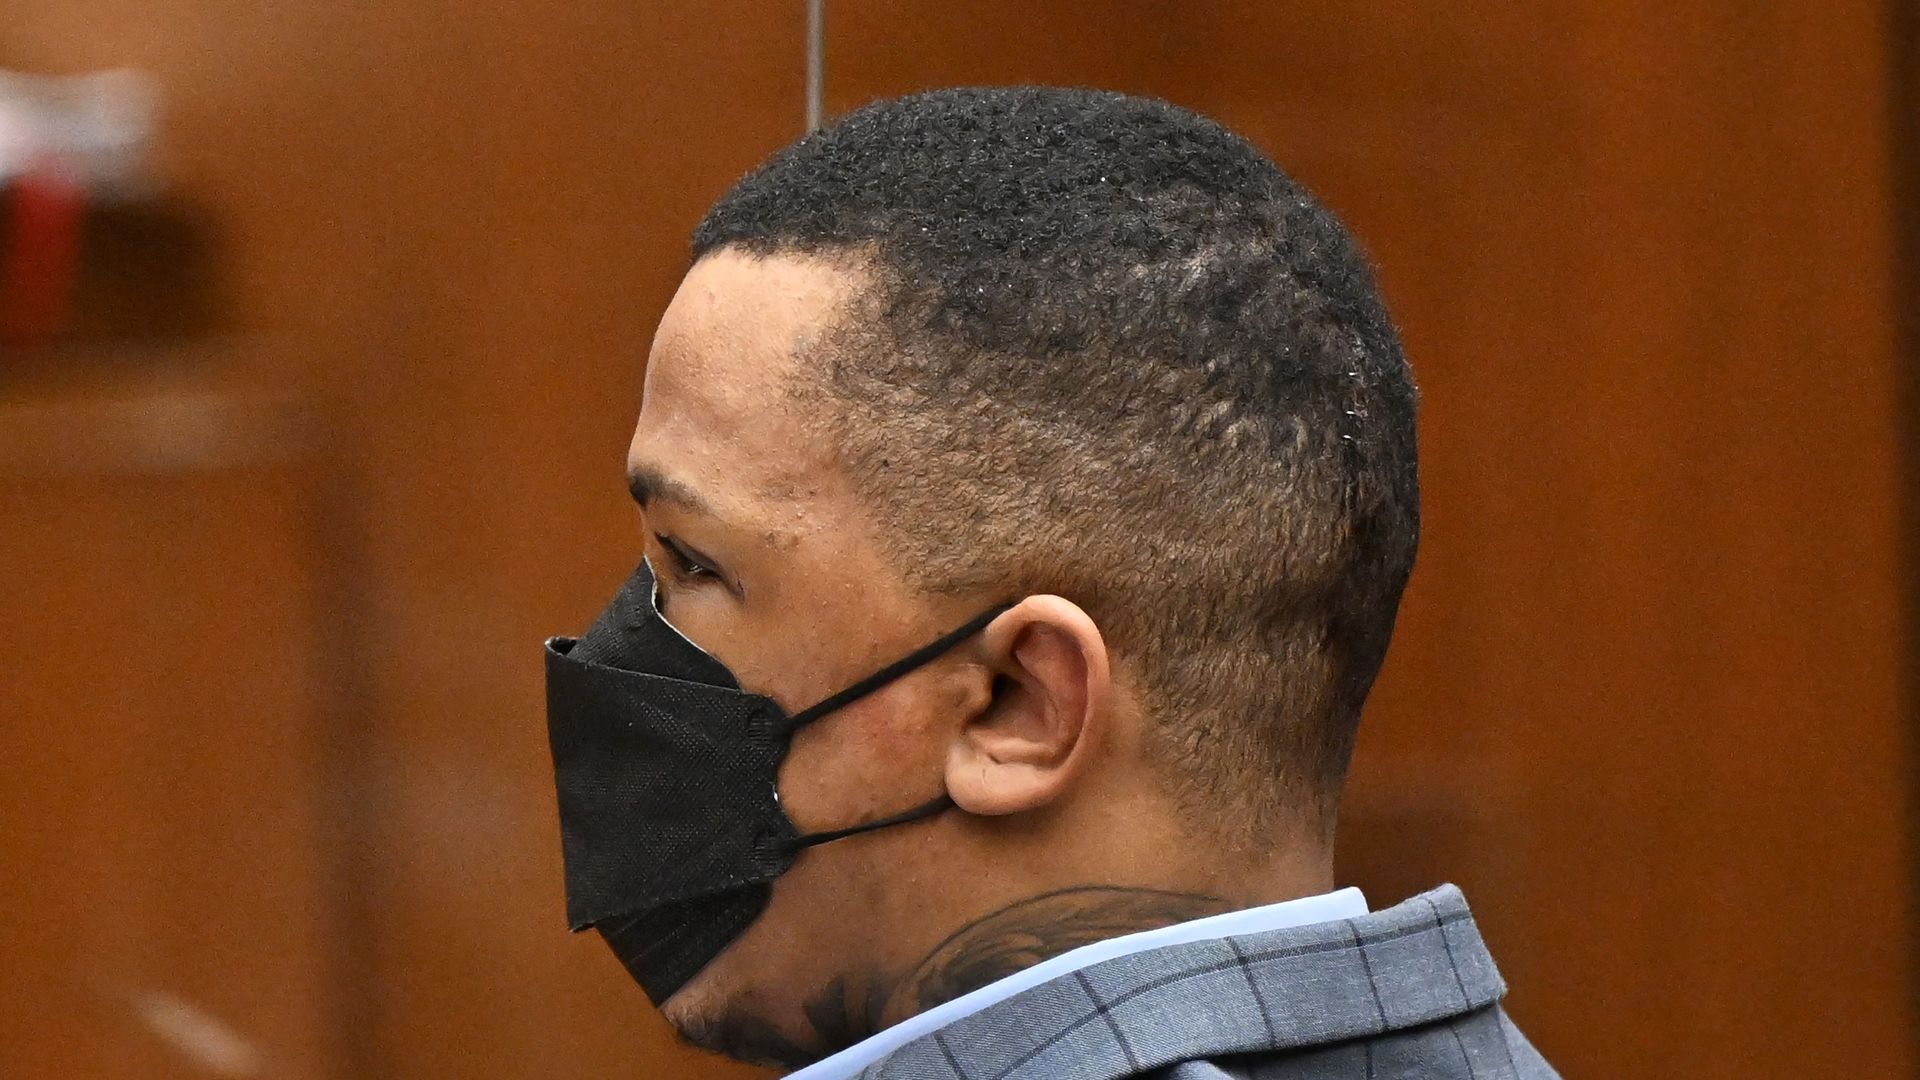 Stitches can be seen on the back of Eric Holder's head.